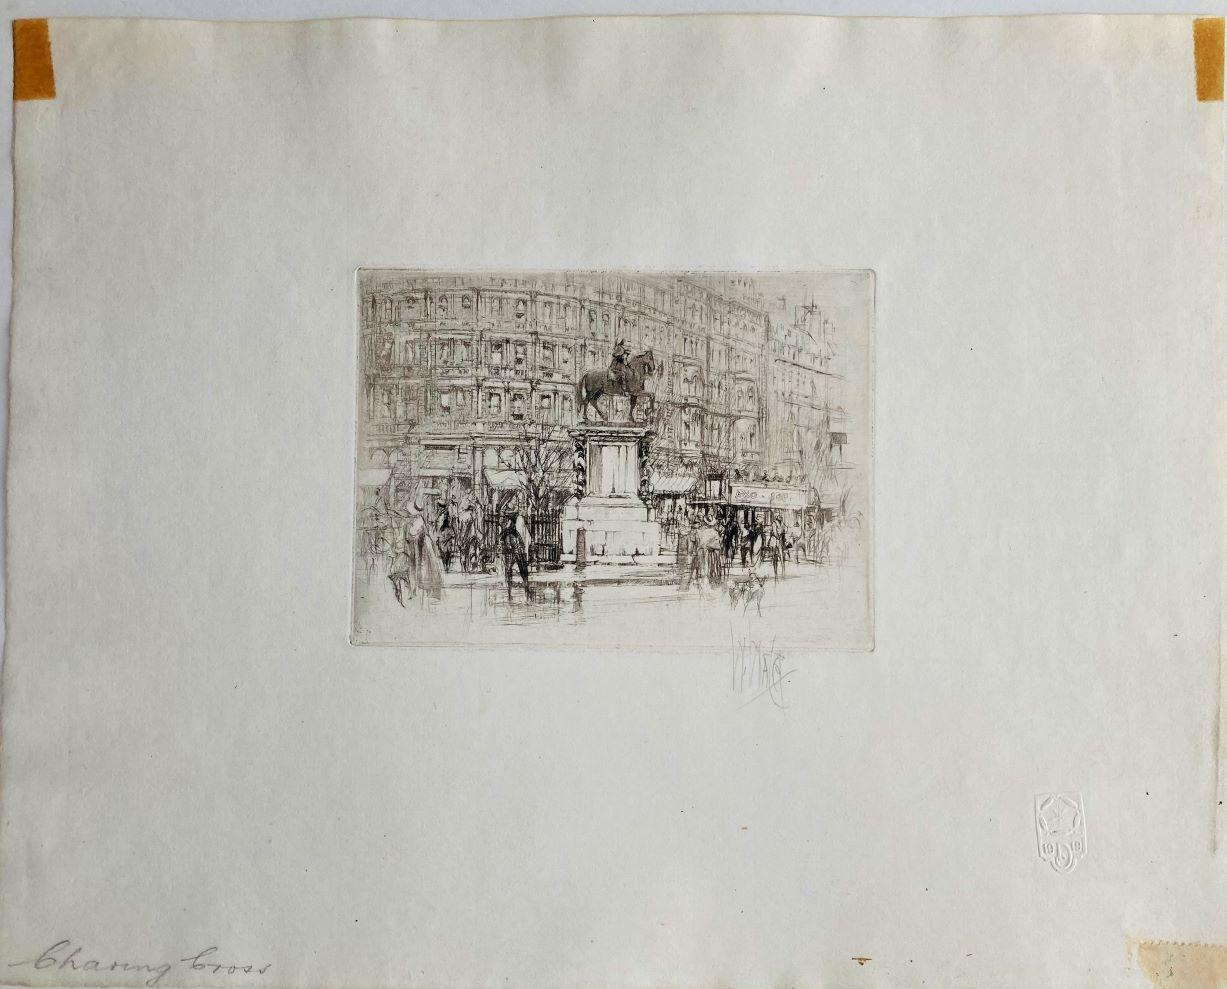 Charing Cross - The Statue of Charles I. - Print by William Walcot, R.E., Hon.R.I.B.A.